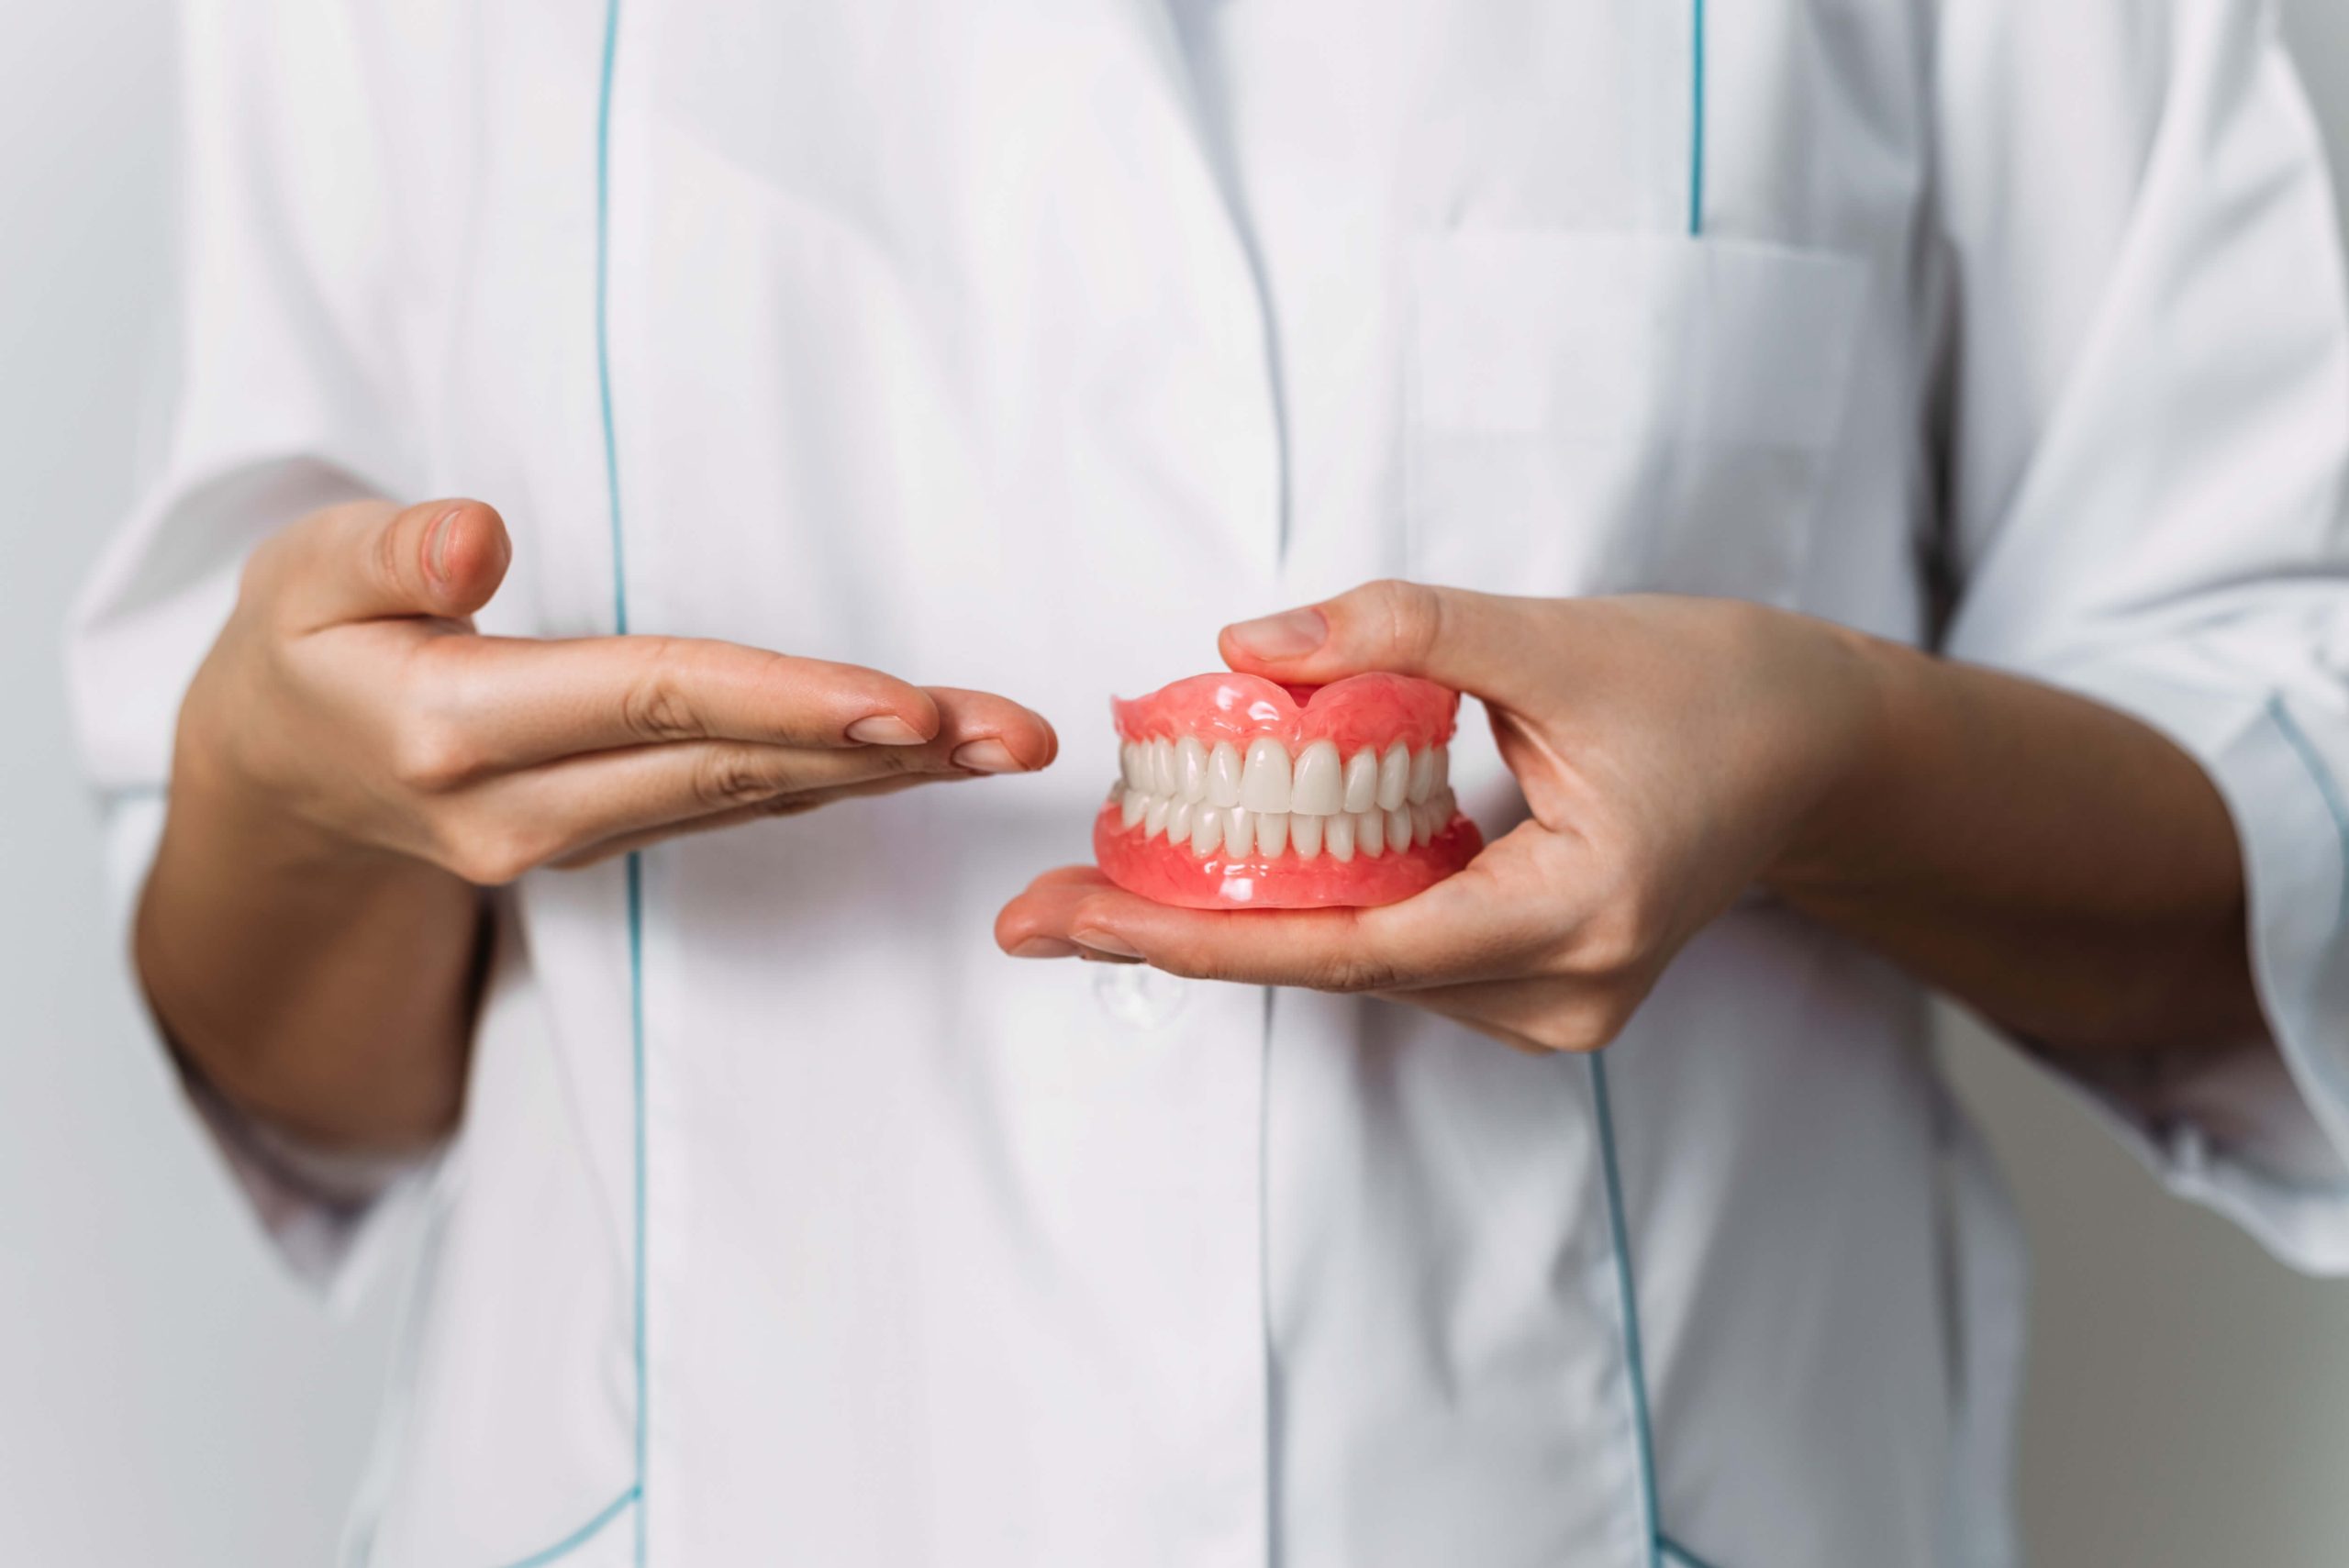 How Do Dentures Fit Over Your Gums?